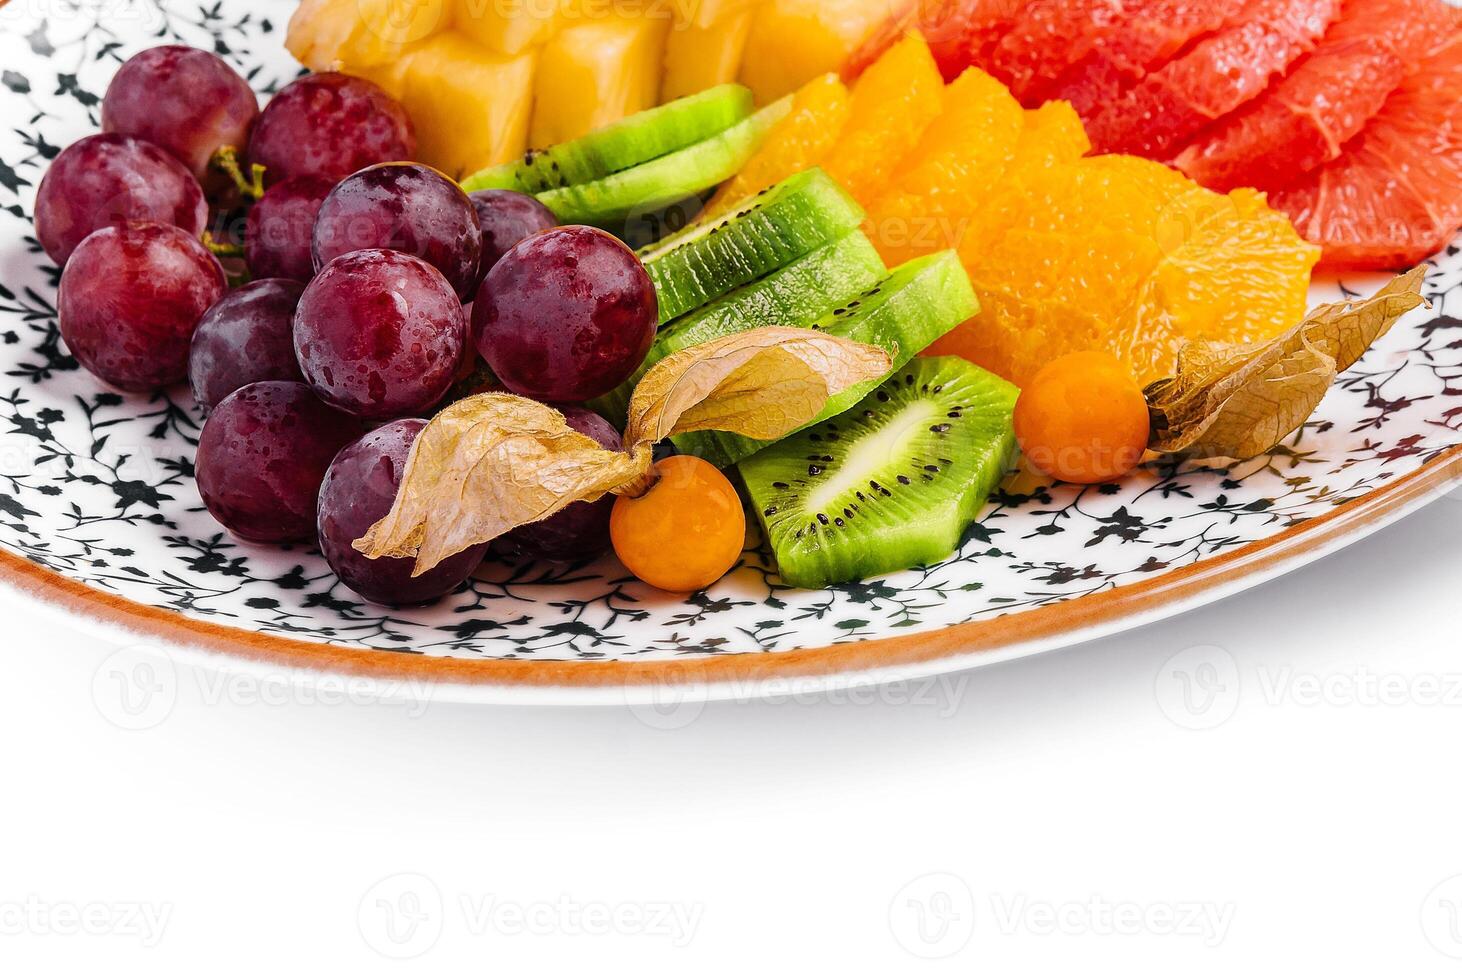 kiwi smoothie with different tropical fruits on a plate photo